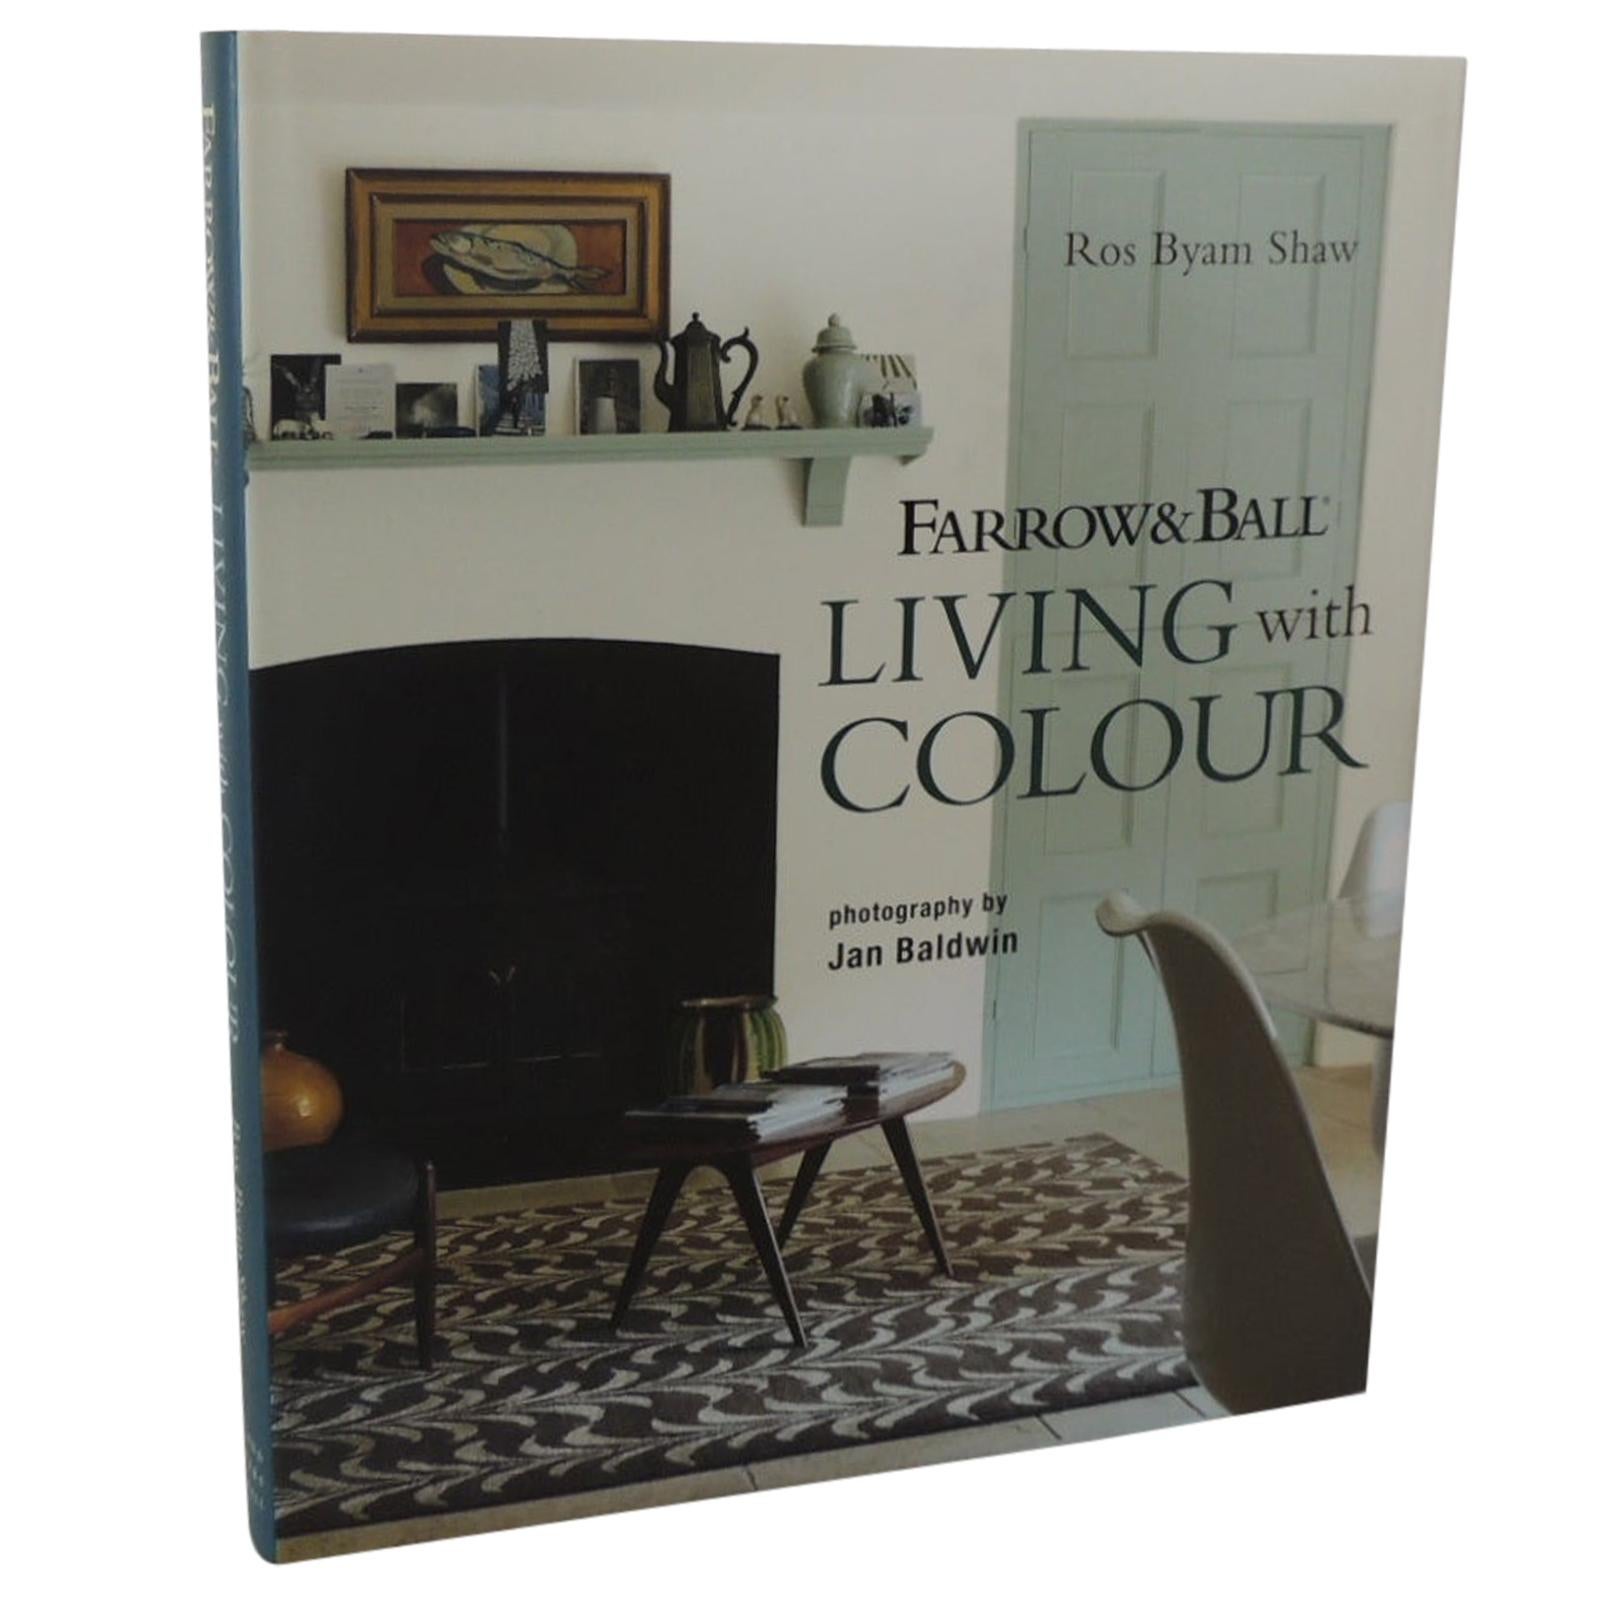 Farrow & Ball Living with Color Hard-Cover Decorative Vintage Coffee Table Book